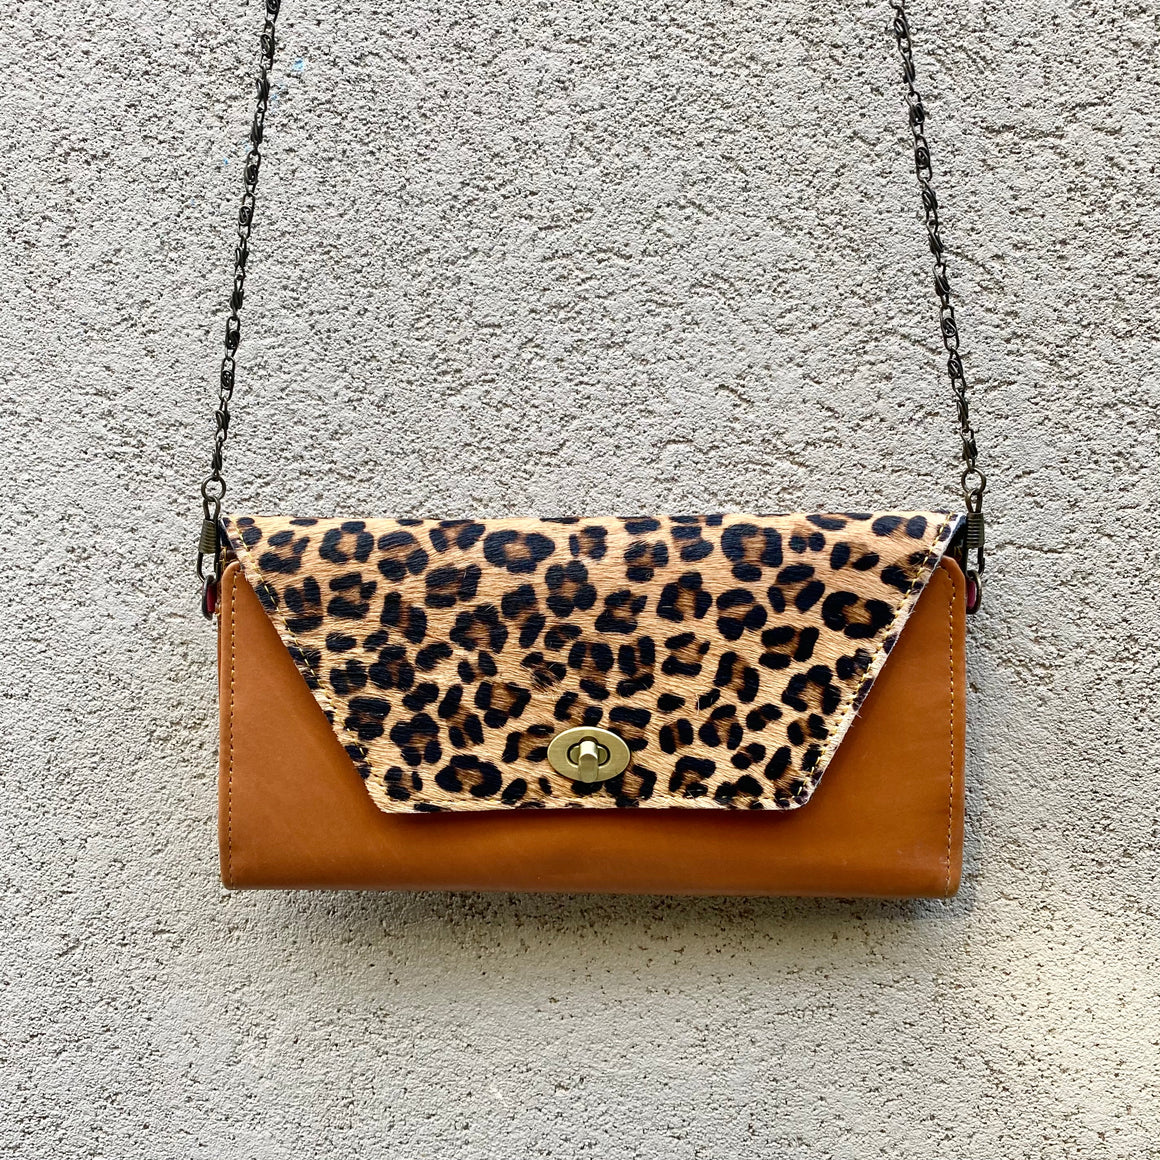 Harley Cowhide and Leather Crossbody Wallet Clutch - Leopard, Apricot Tan - KITTY KAT